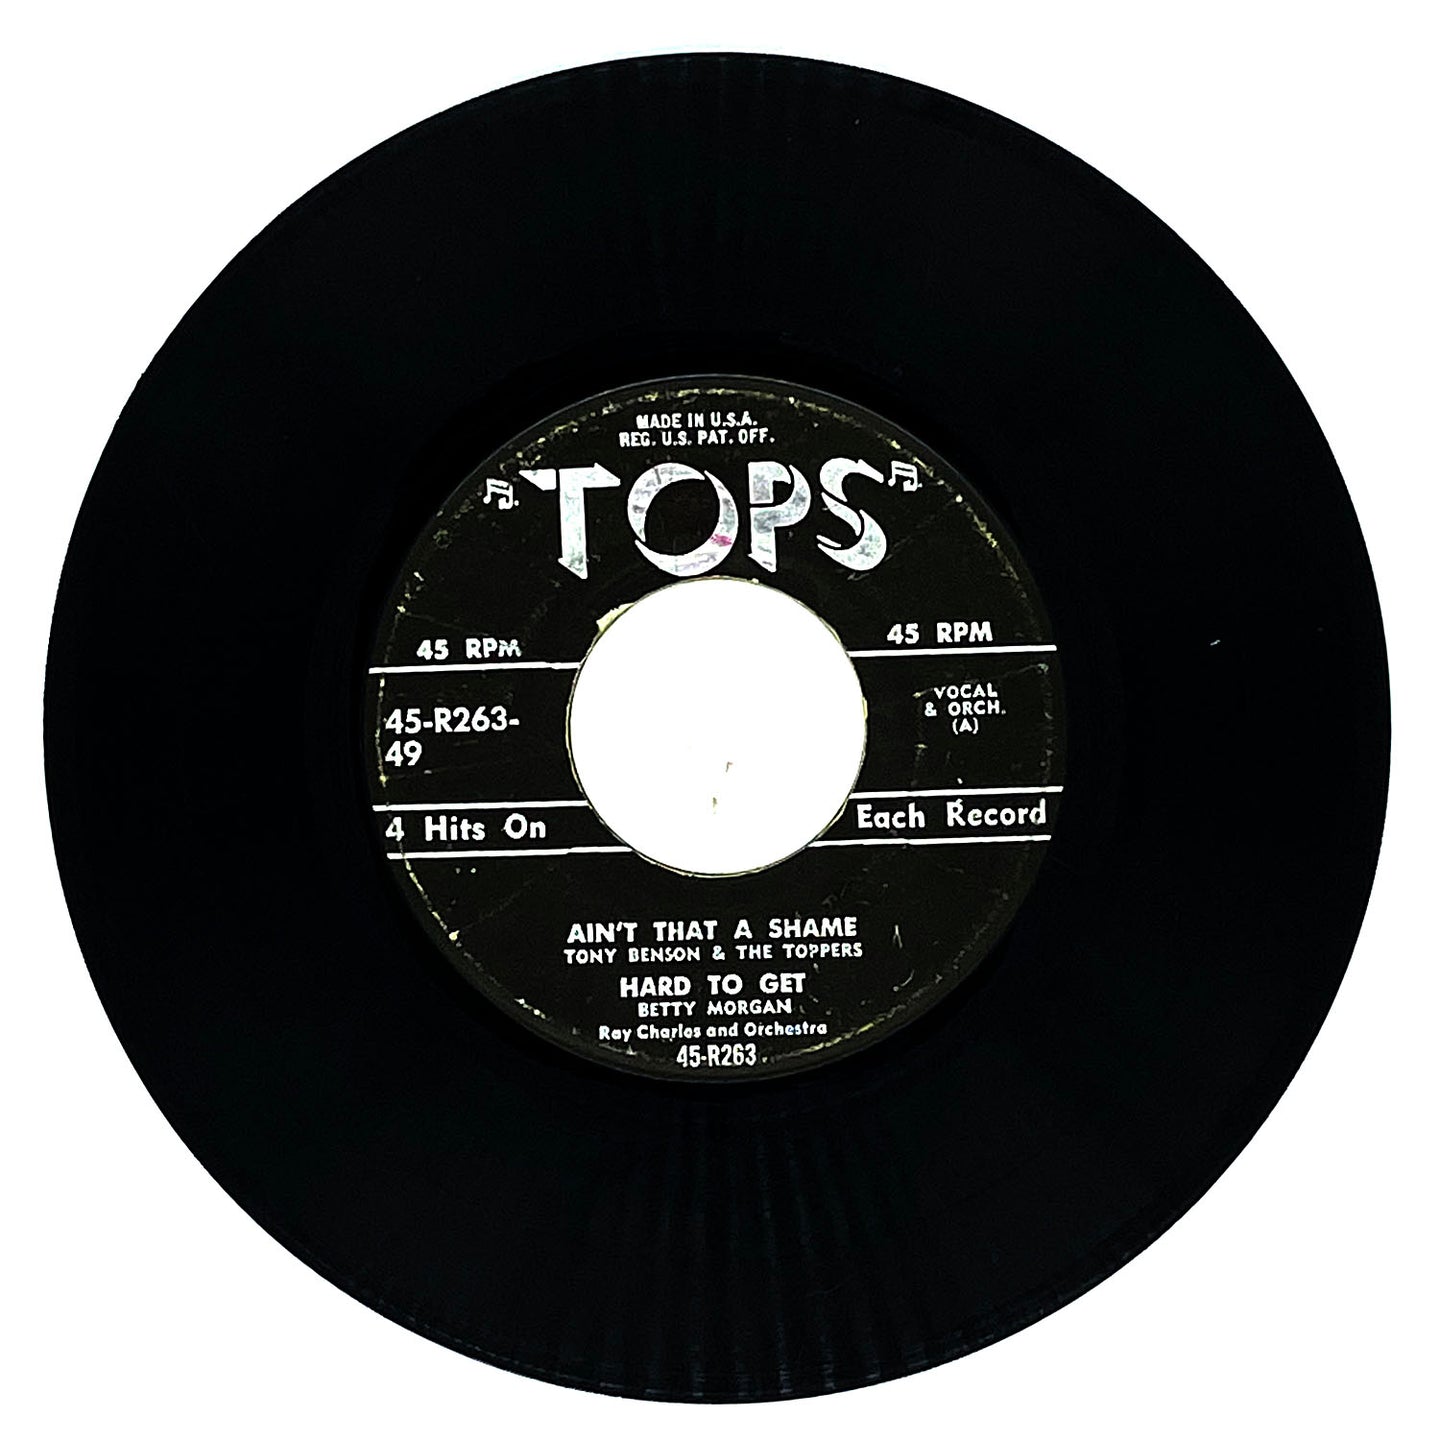 Tony Benson & The Toppers : AIN'T THAT A SHAME/ Betty Morgan : HARD TO GET/ The Toppers : YELLOW ROSE OF TEXAS/ WAKE THE TOWN